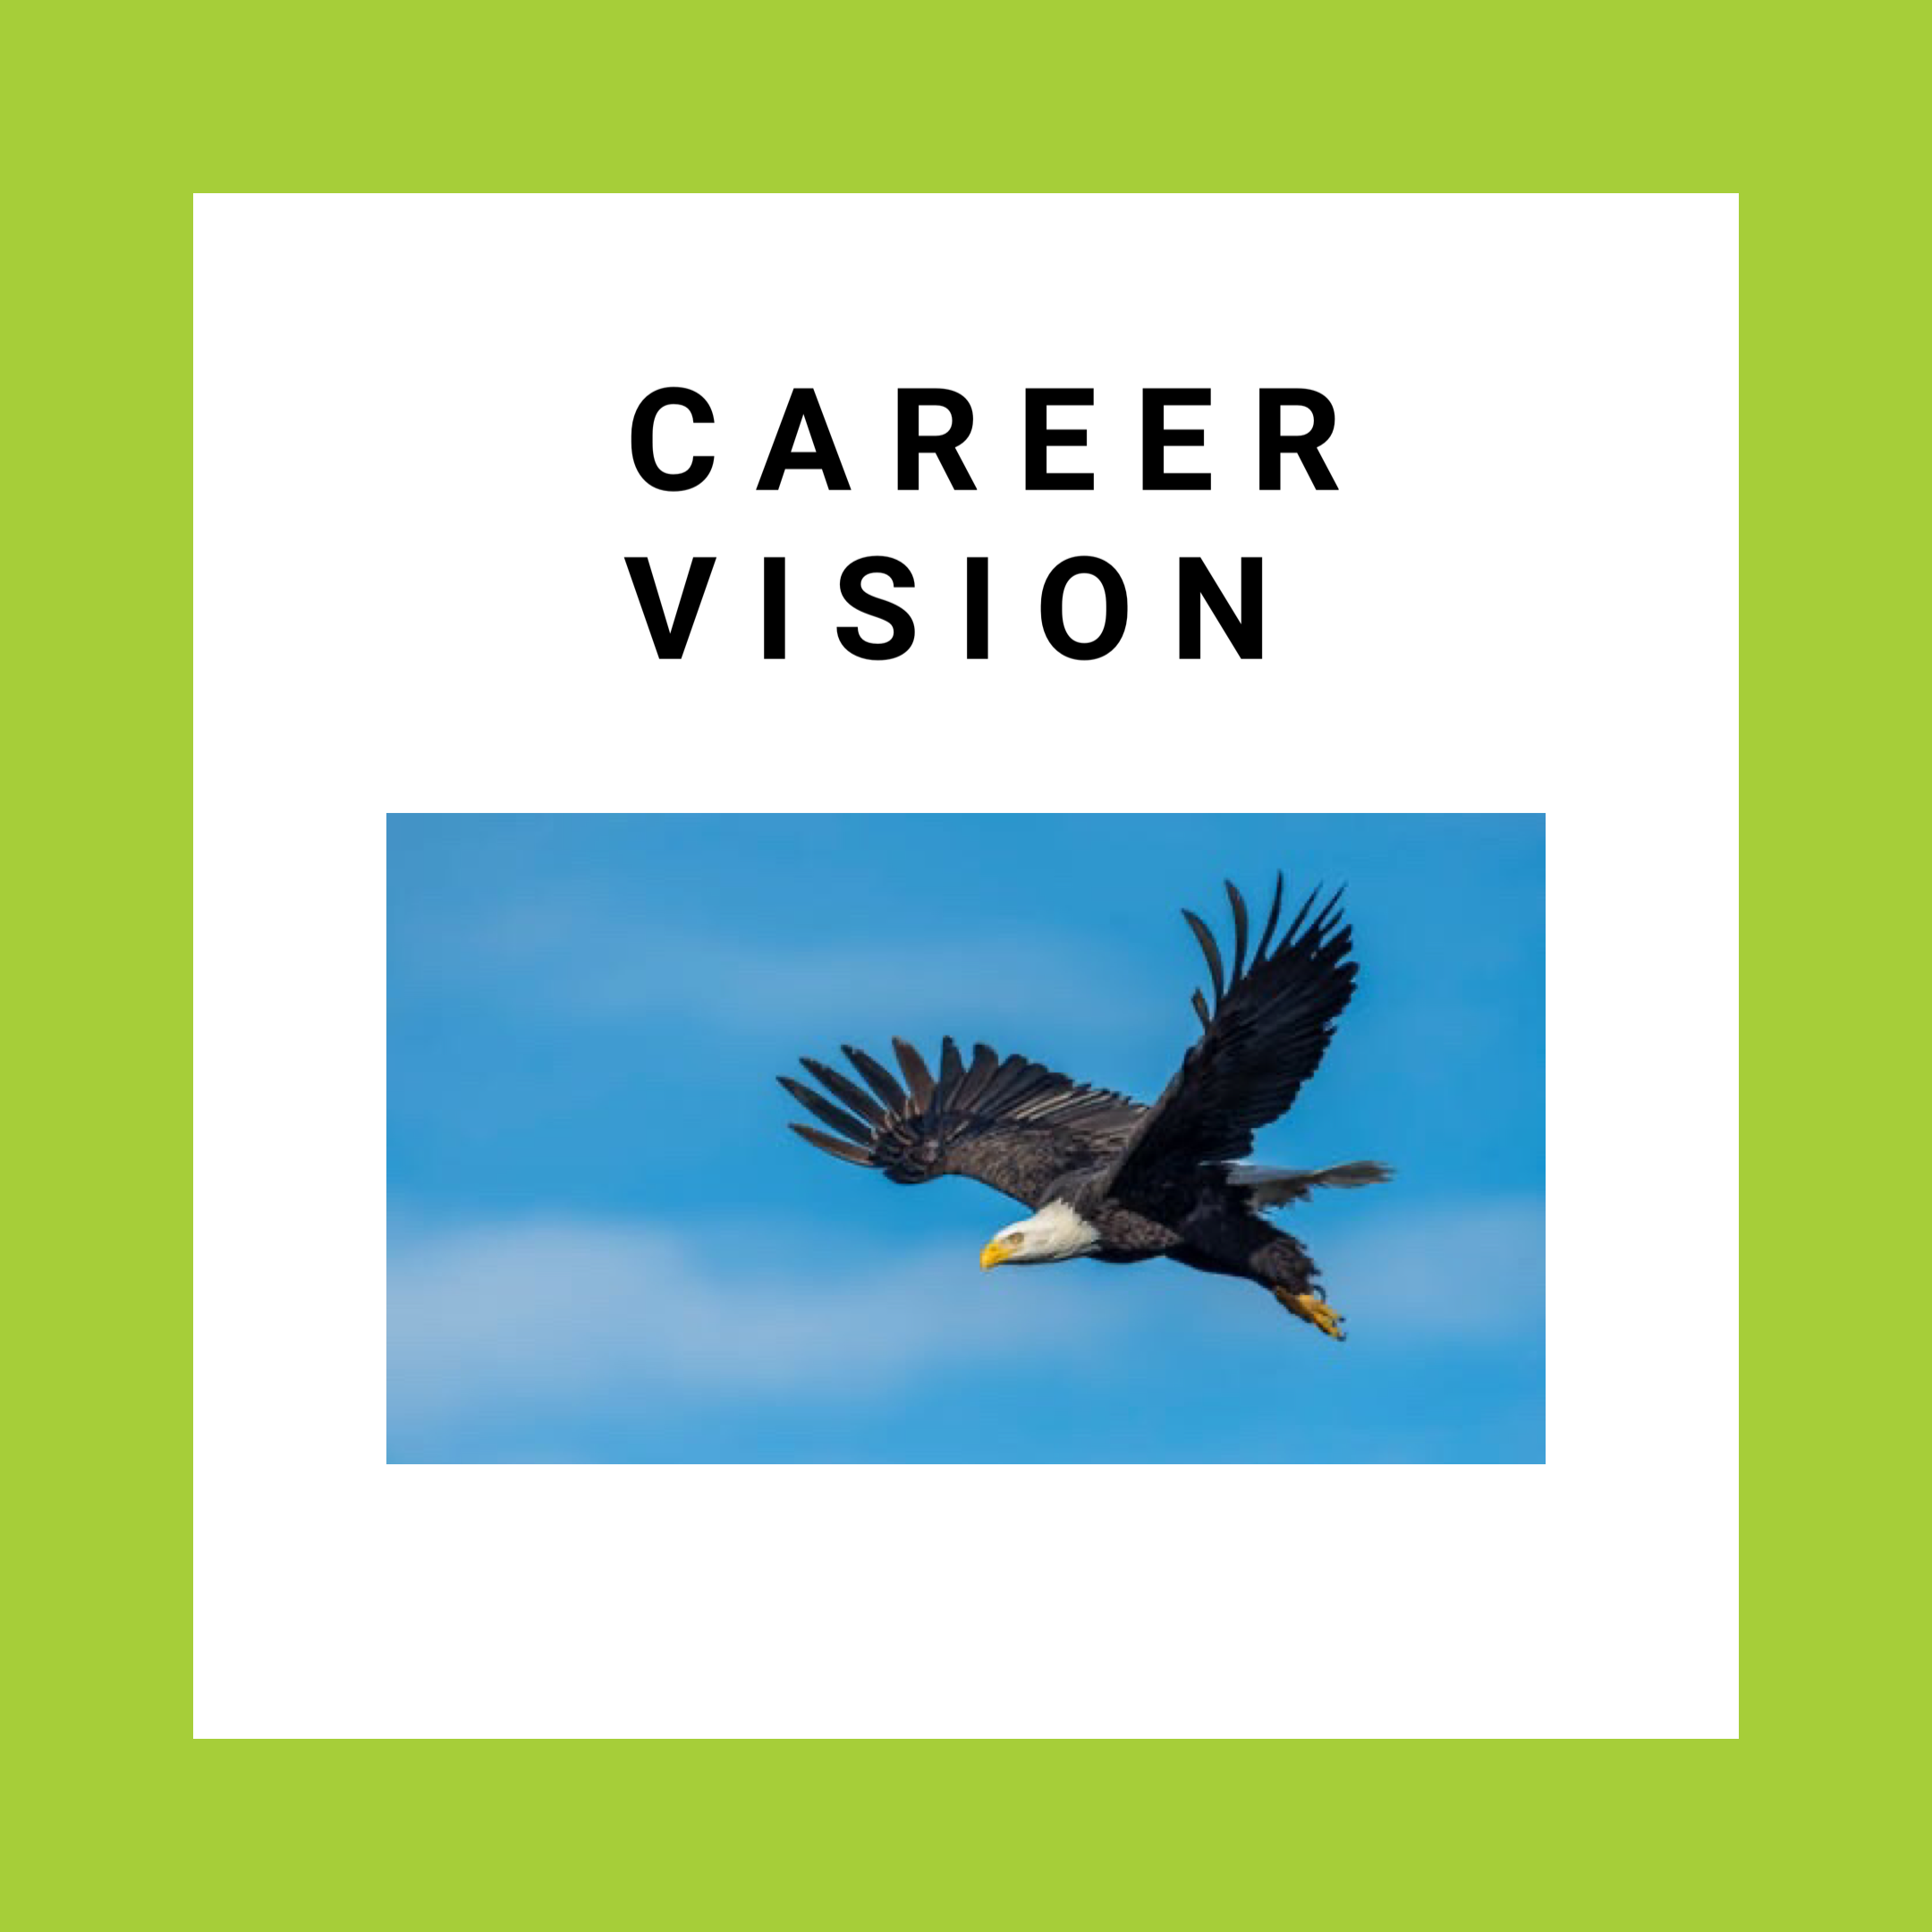 Eagle flying in photo image with career vision as title